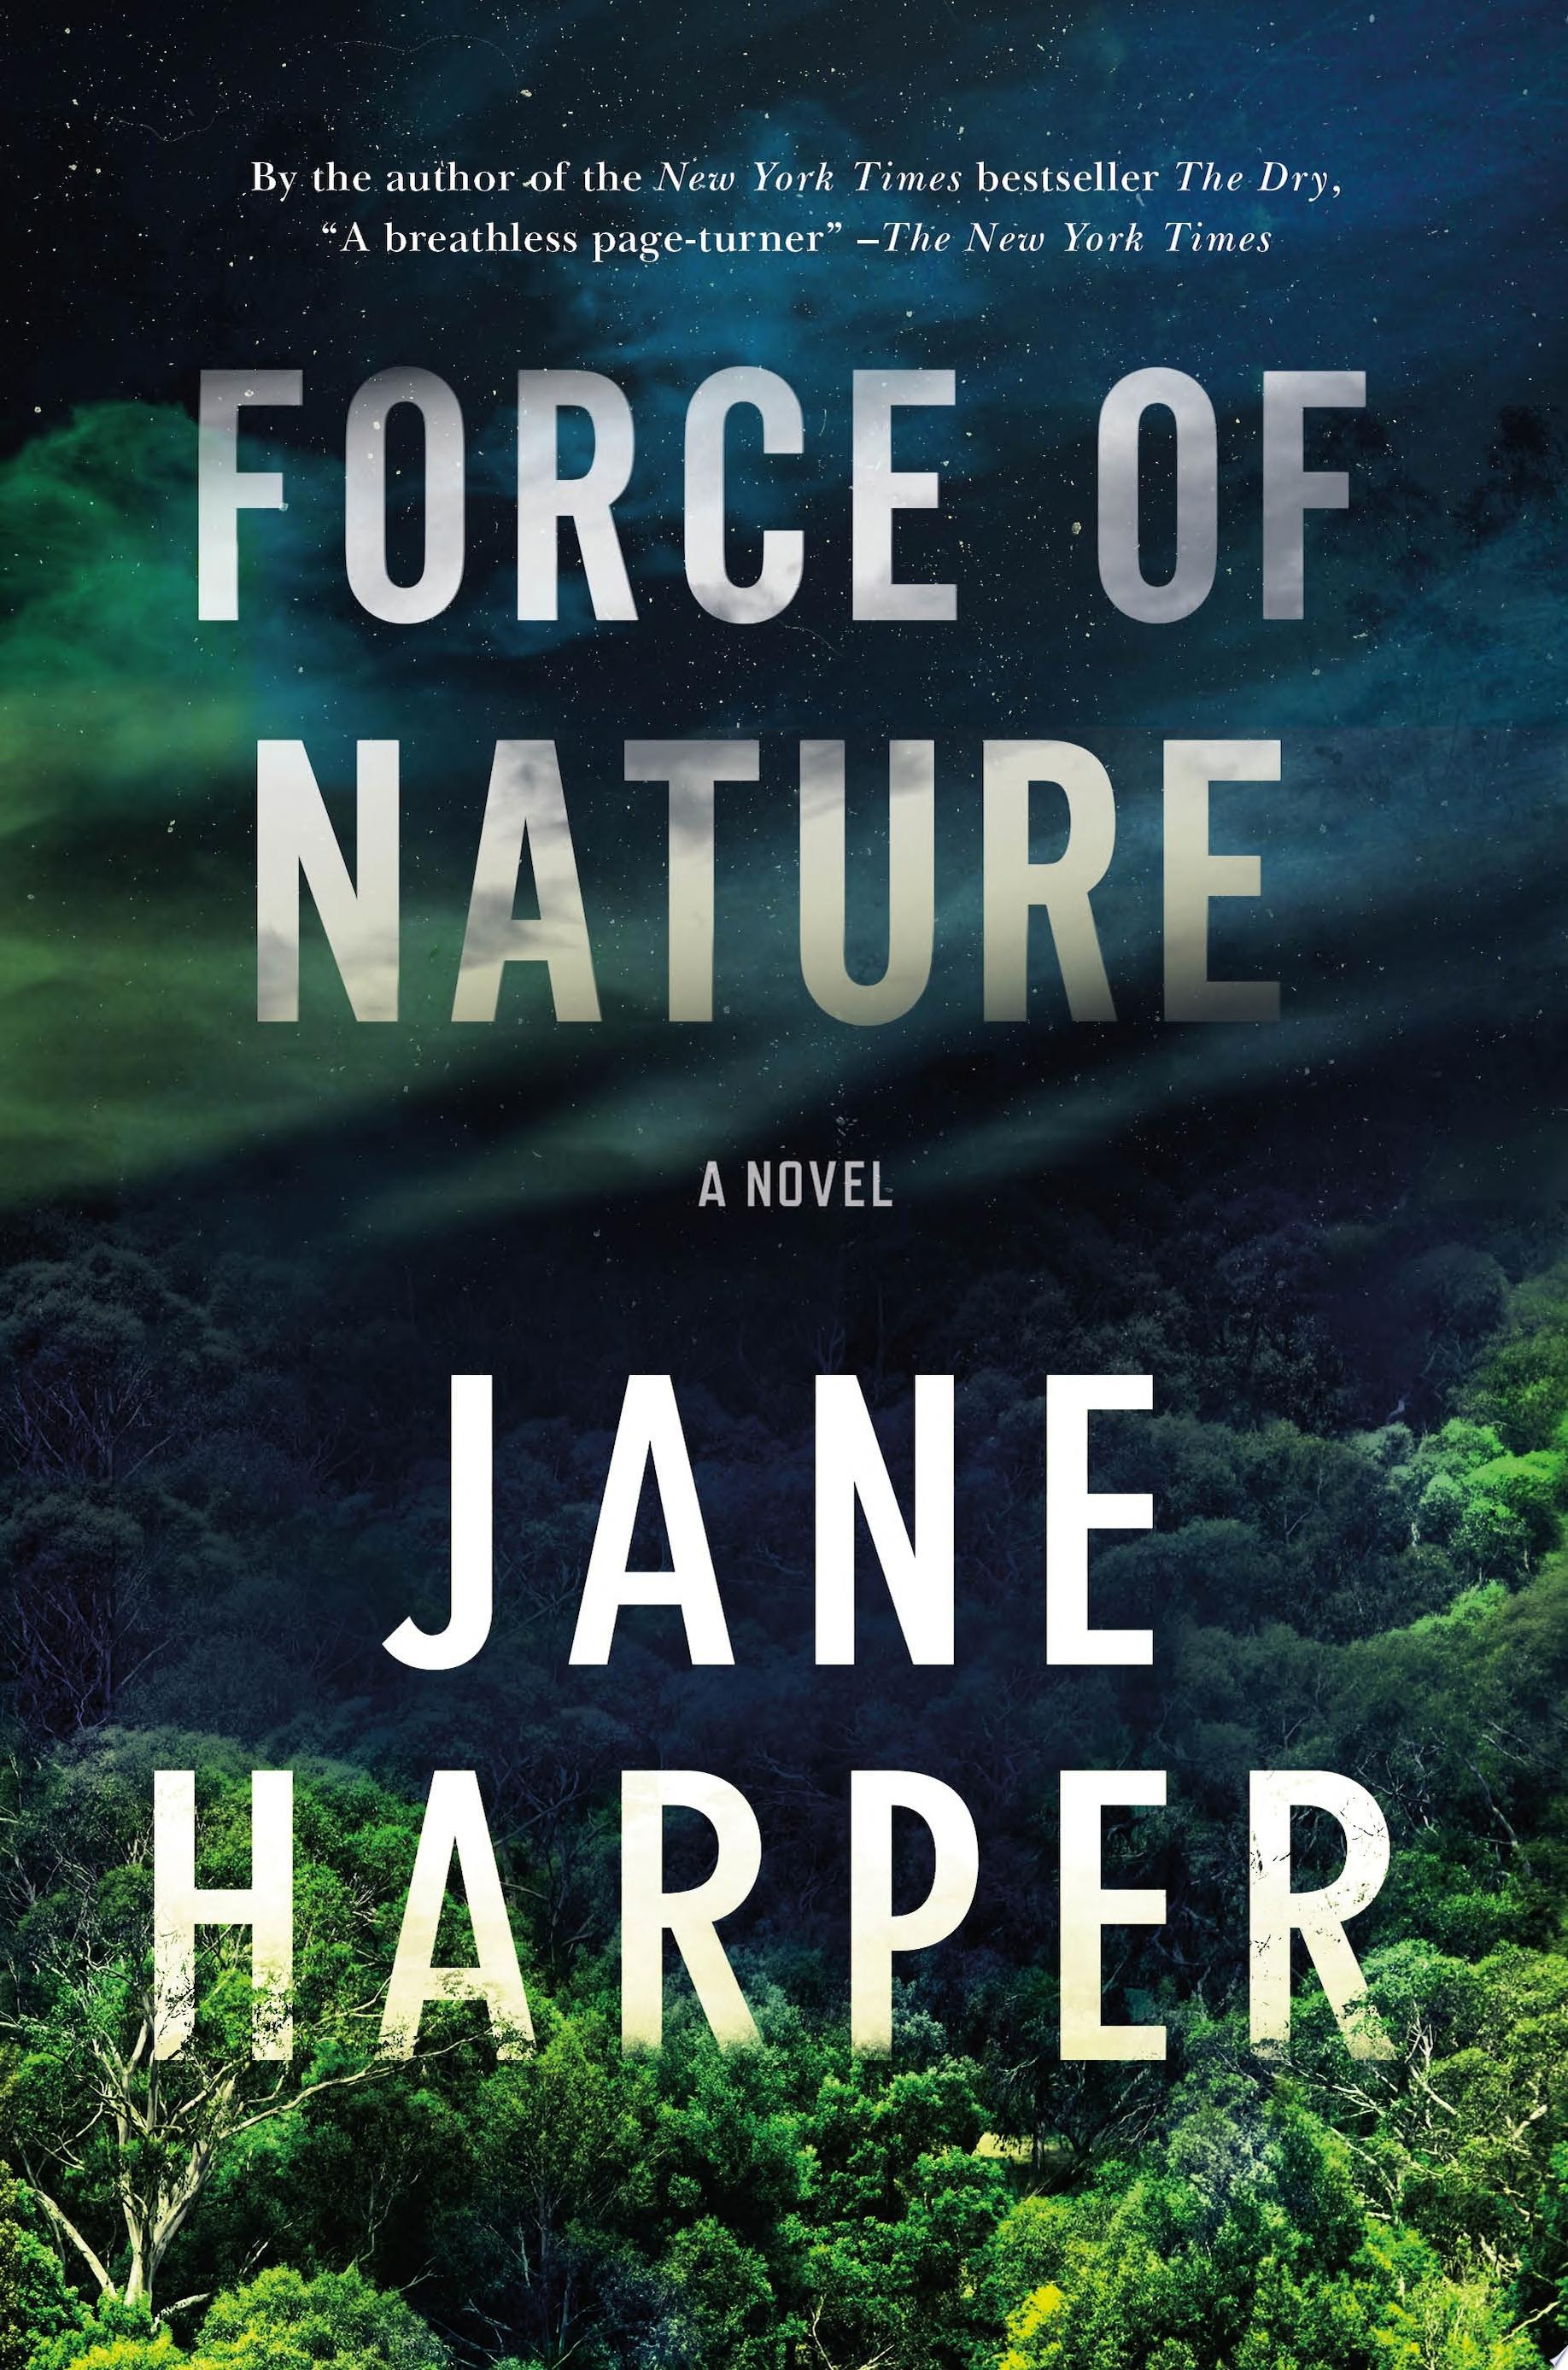 Image for "Force of Nature"